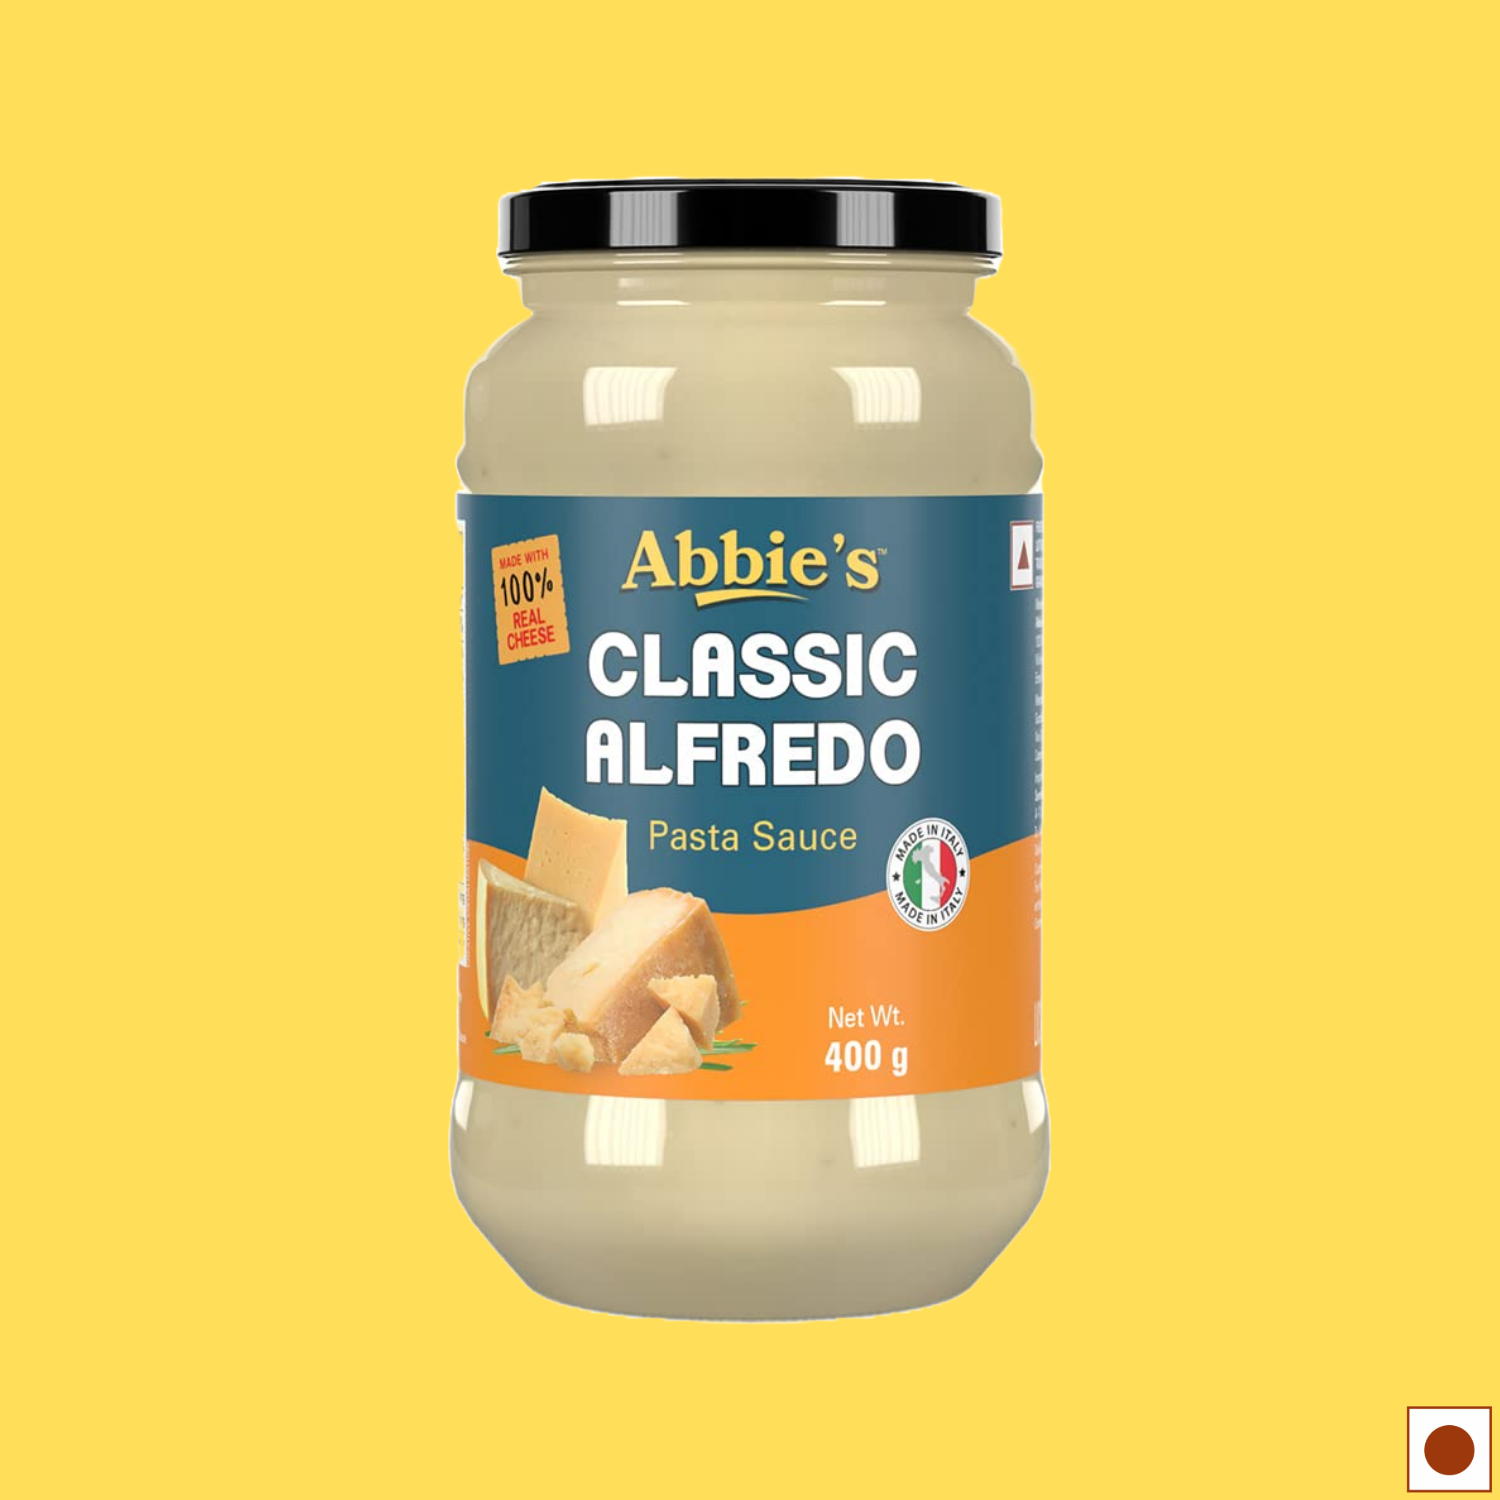 Abbie's Classic Alfredo Pasta Sauce, 400g (Impoted)